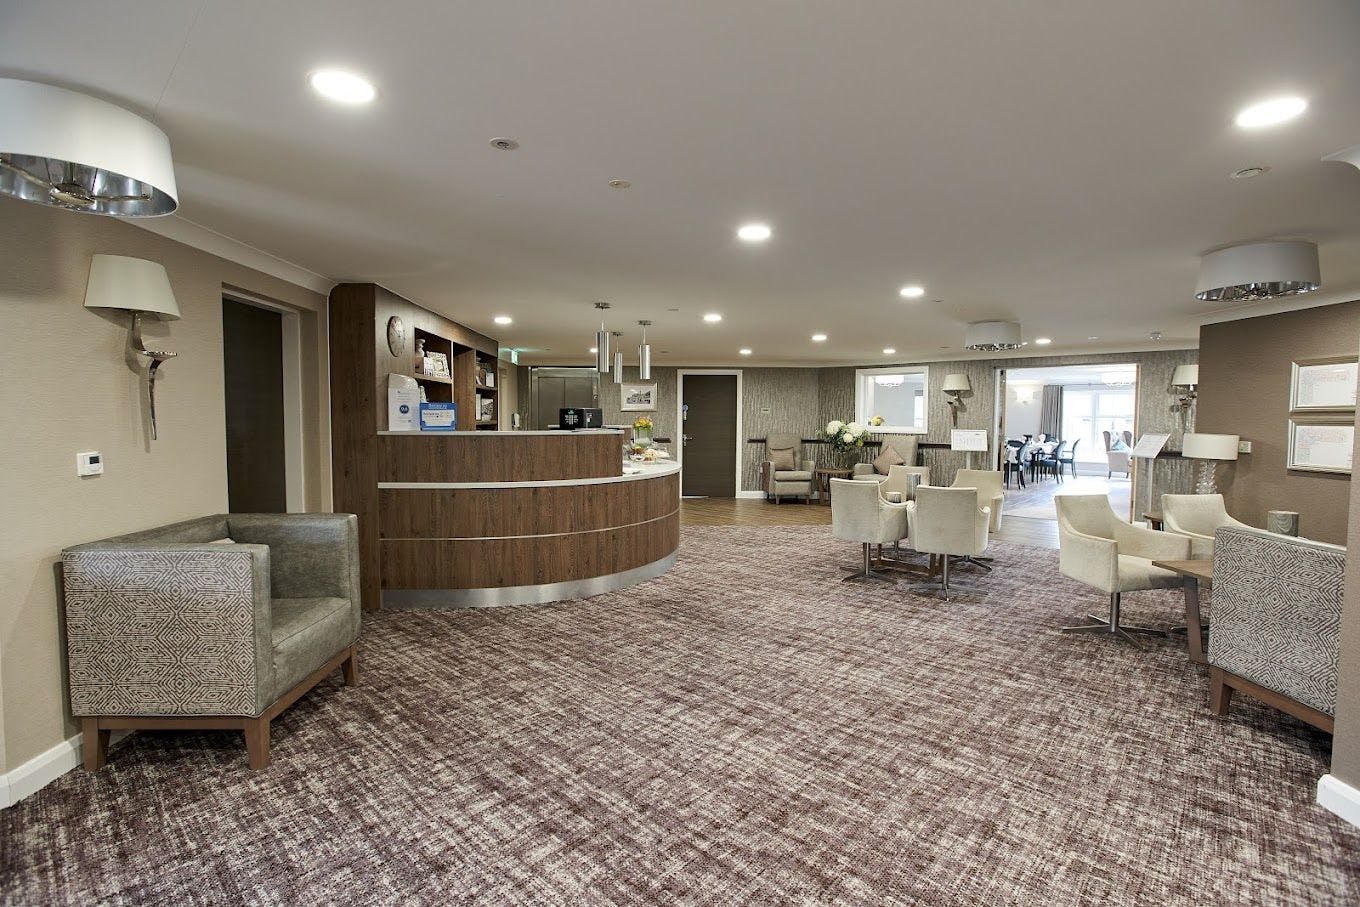 Reception of Nodens Manor care home in Lydney, Gloucestershire